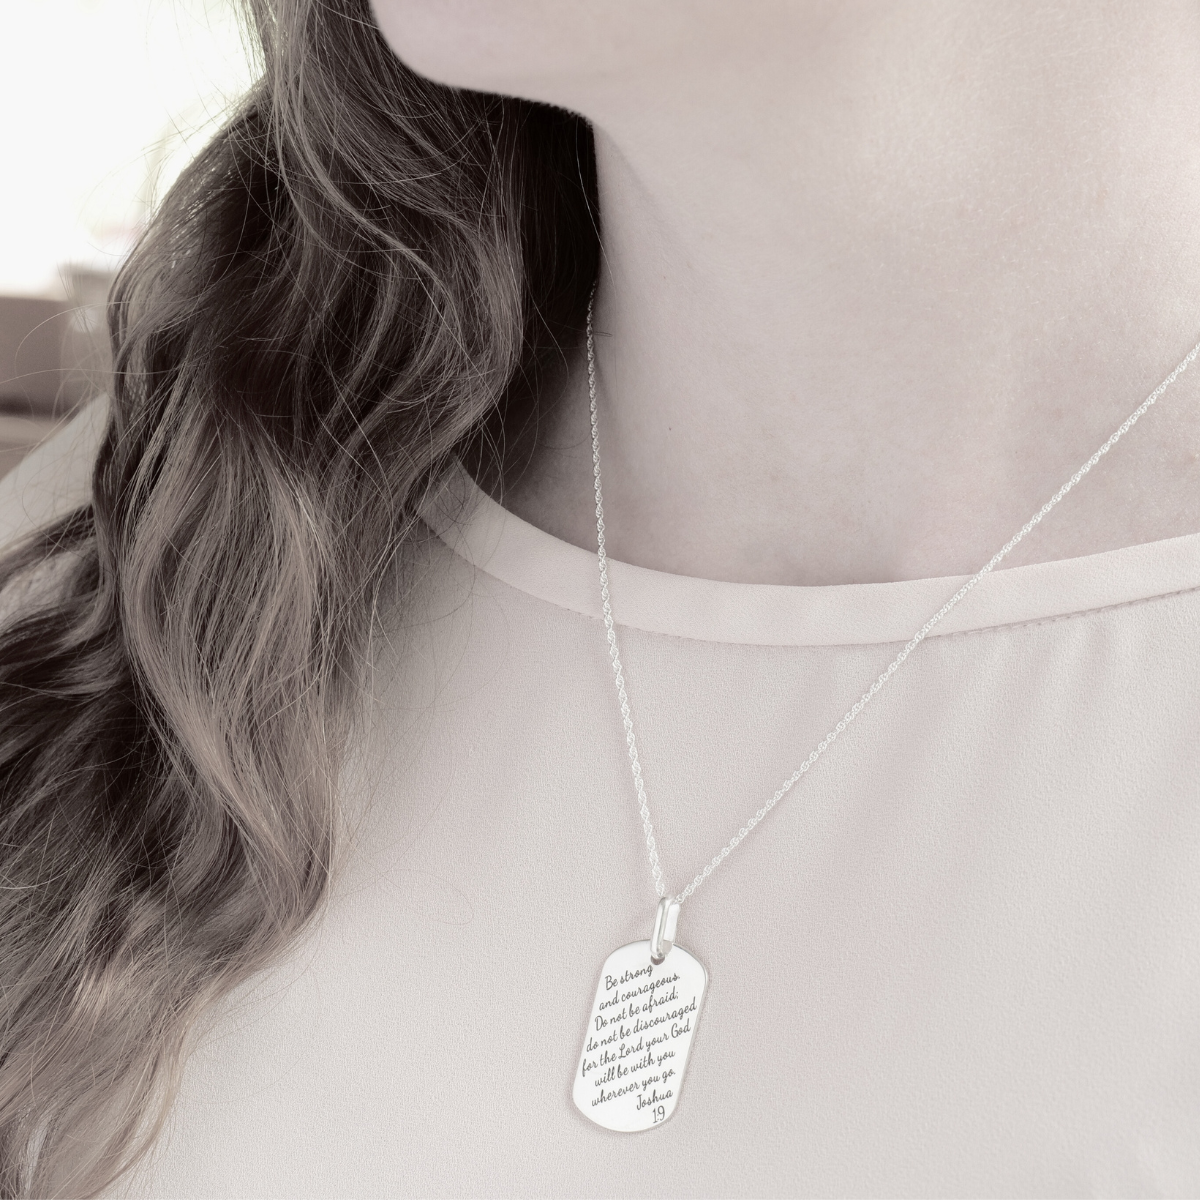 Custom Dog Tag Necklace - Engraved Sterling Silver